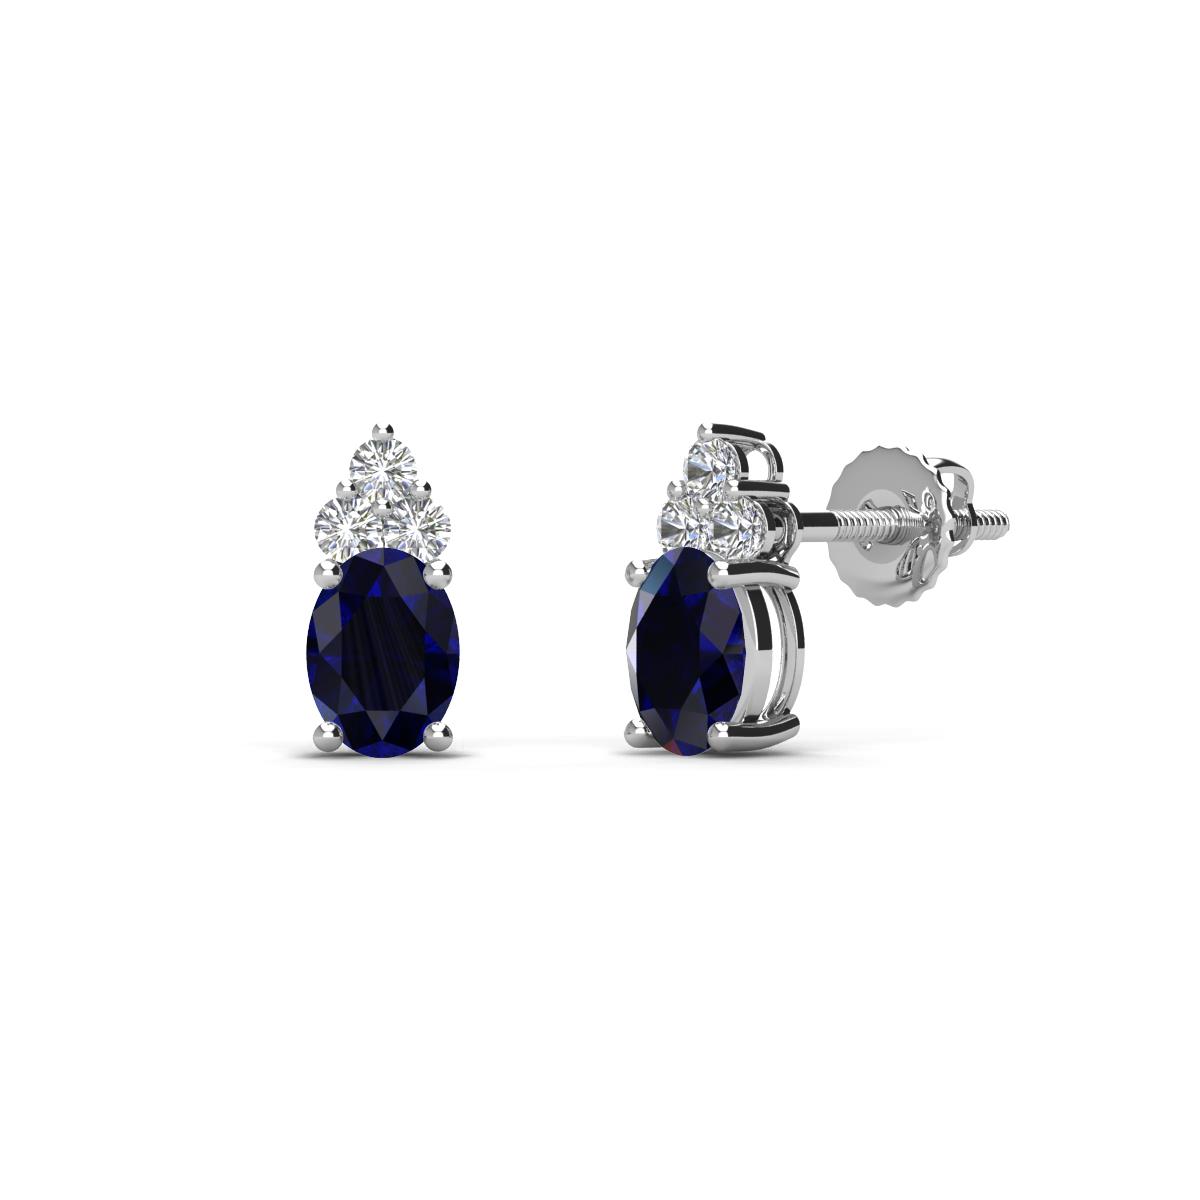 Details about   925 Sterling Silver White Gold Blue Sapphire Oval Cut 6X4 MM Earrings